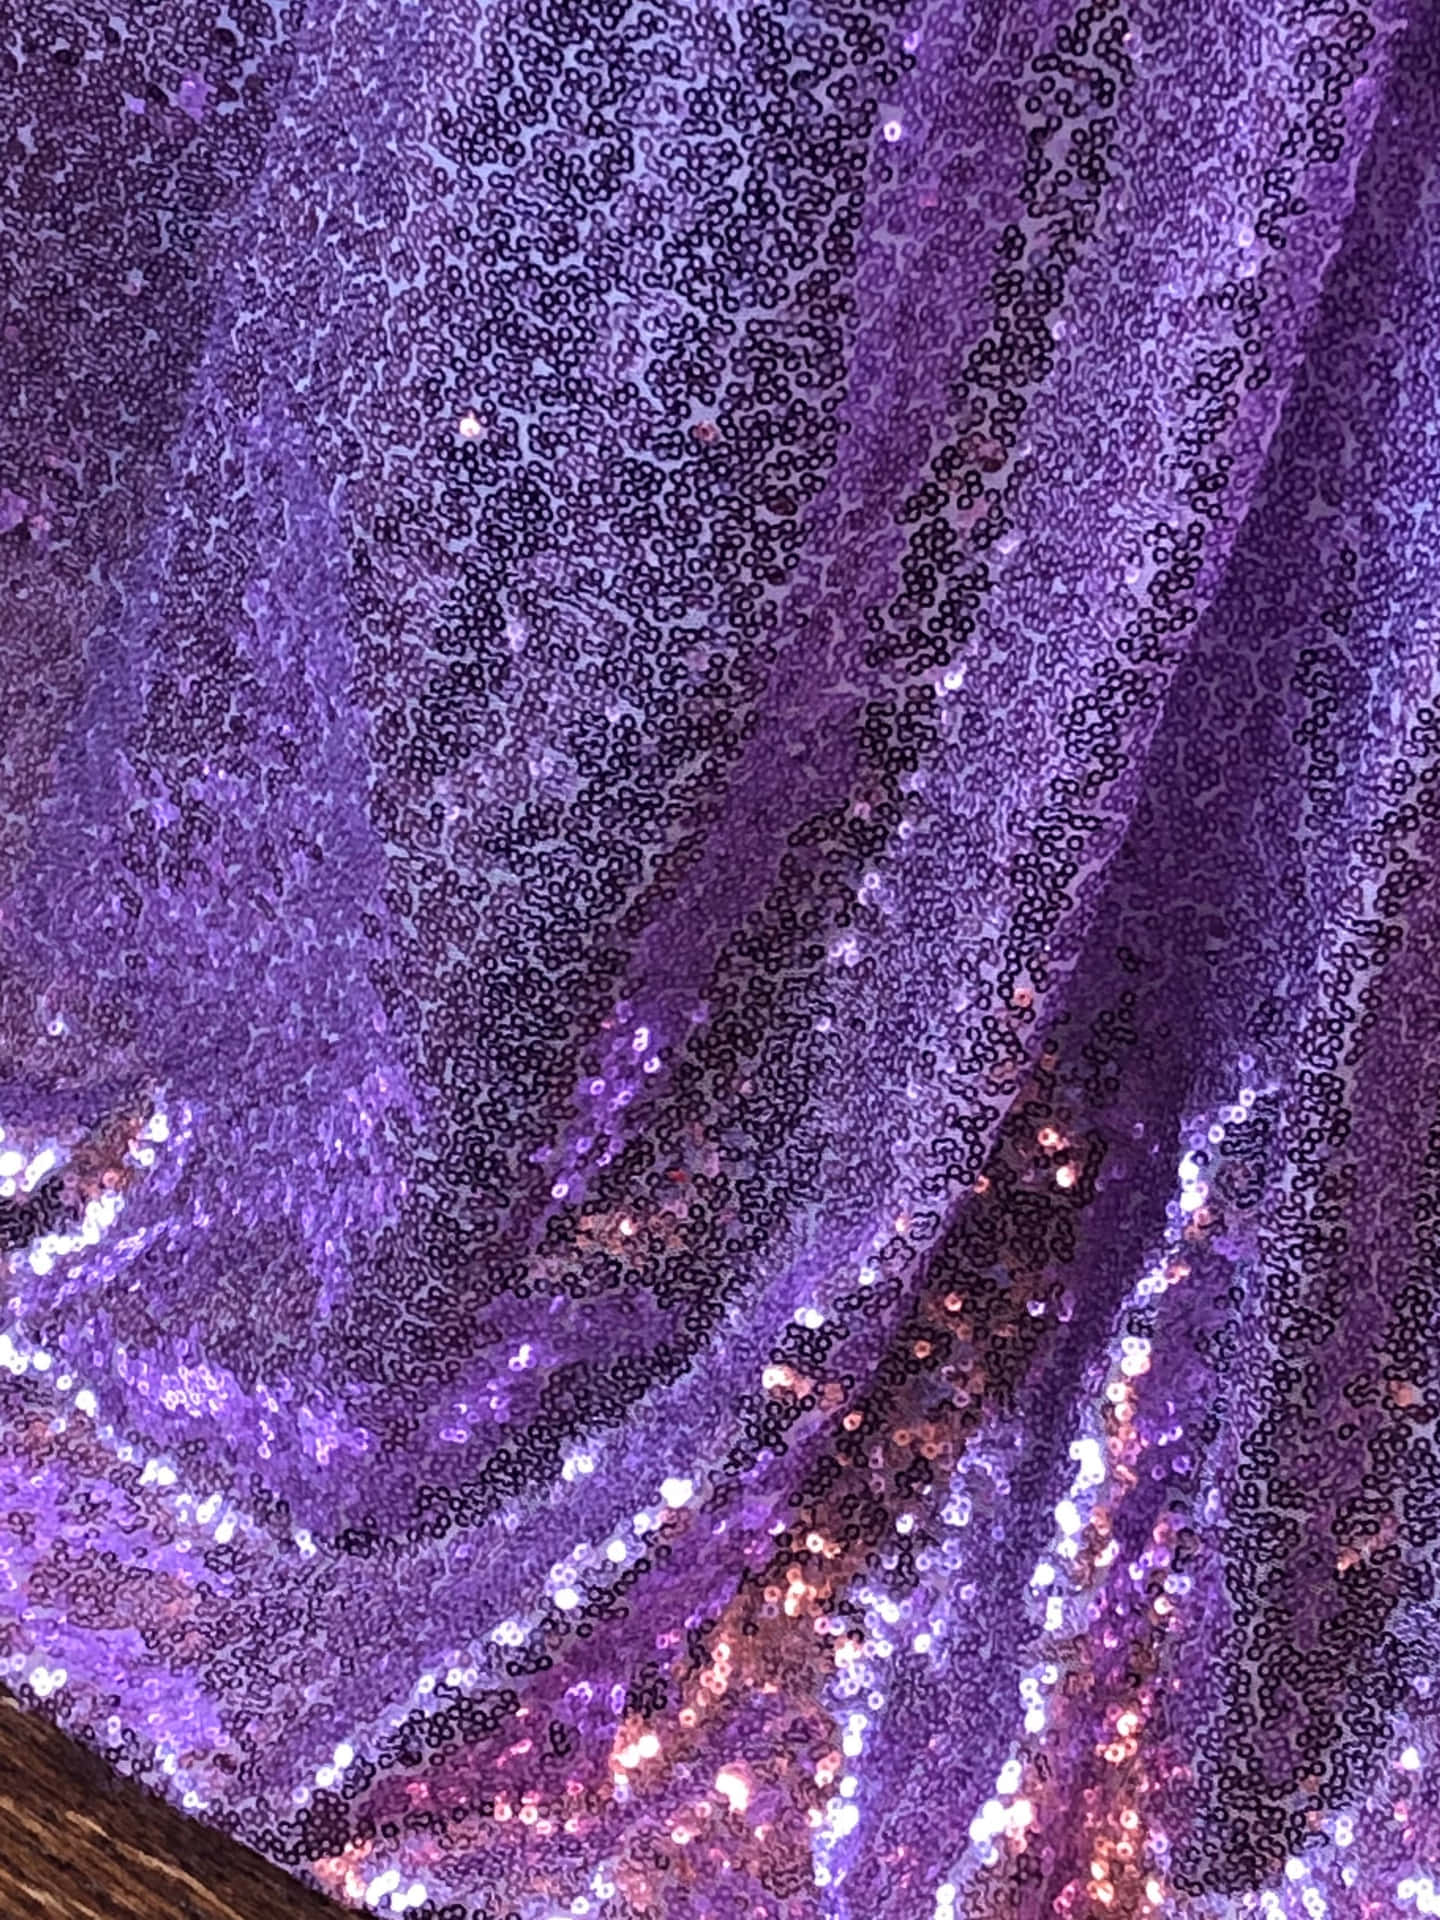 Sparkling and stylish - this purple sequin wallpaper adds a bold modern touch to any interior. Wallpaper